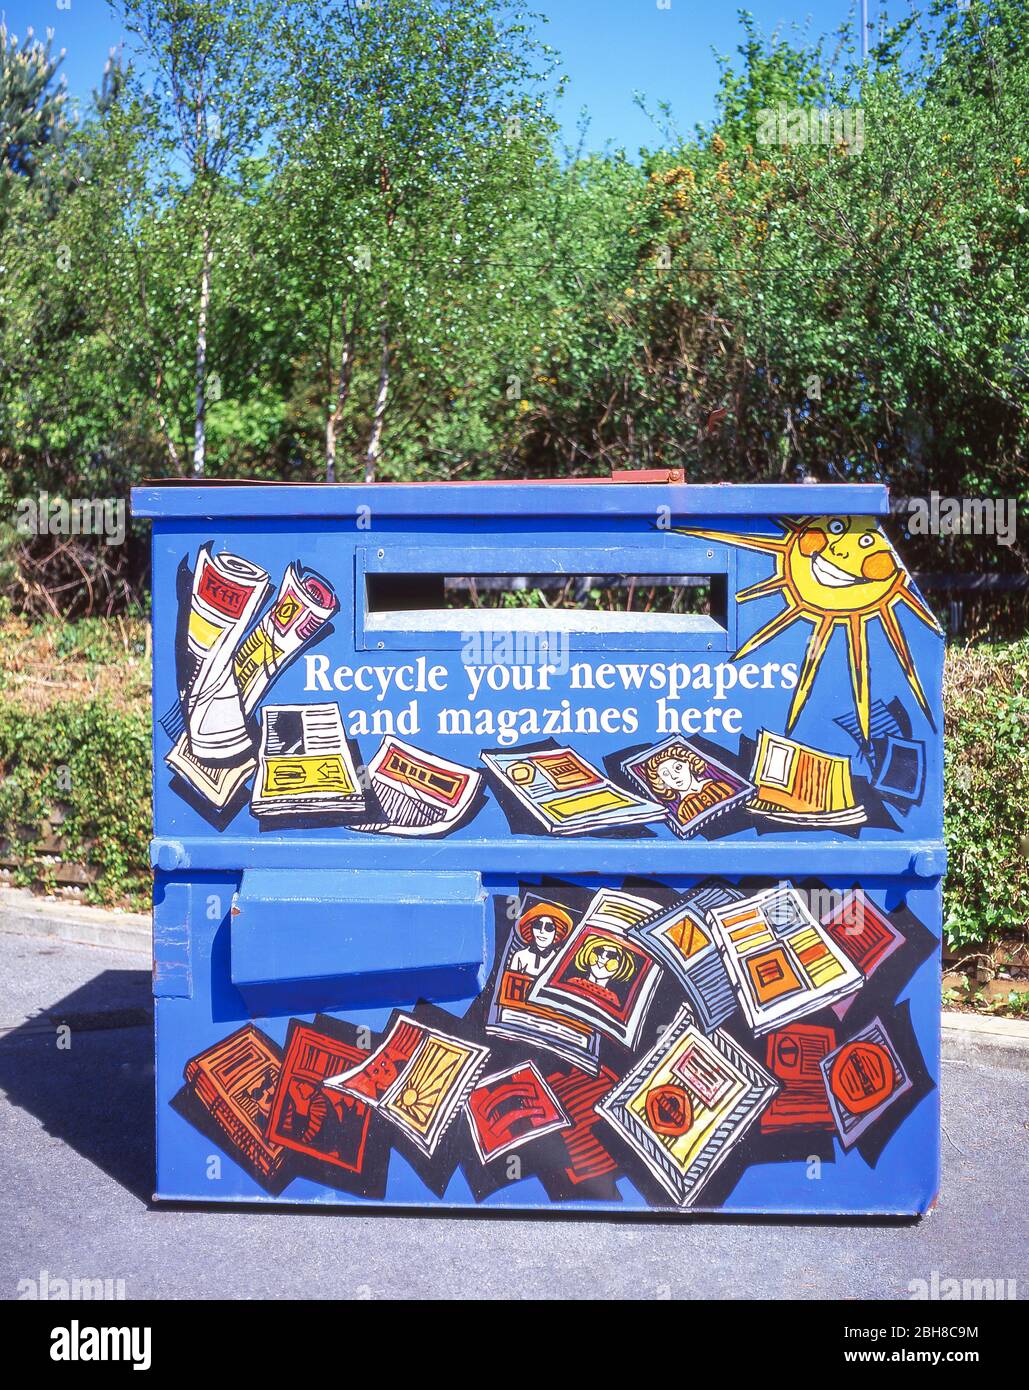 Newspaper and magazine recycling bin, London Borough of Richmond upon Thames, Greater London, England, United Kingdom Stock Photo